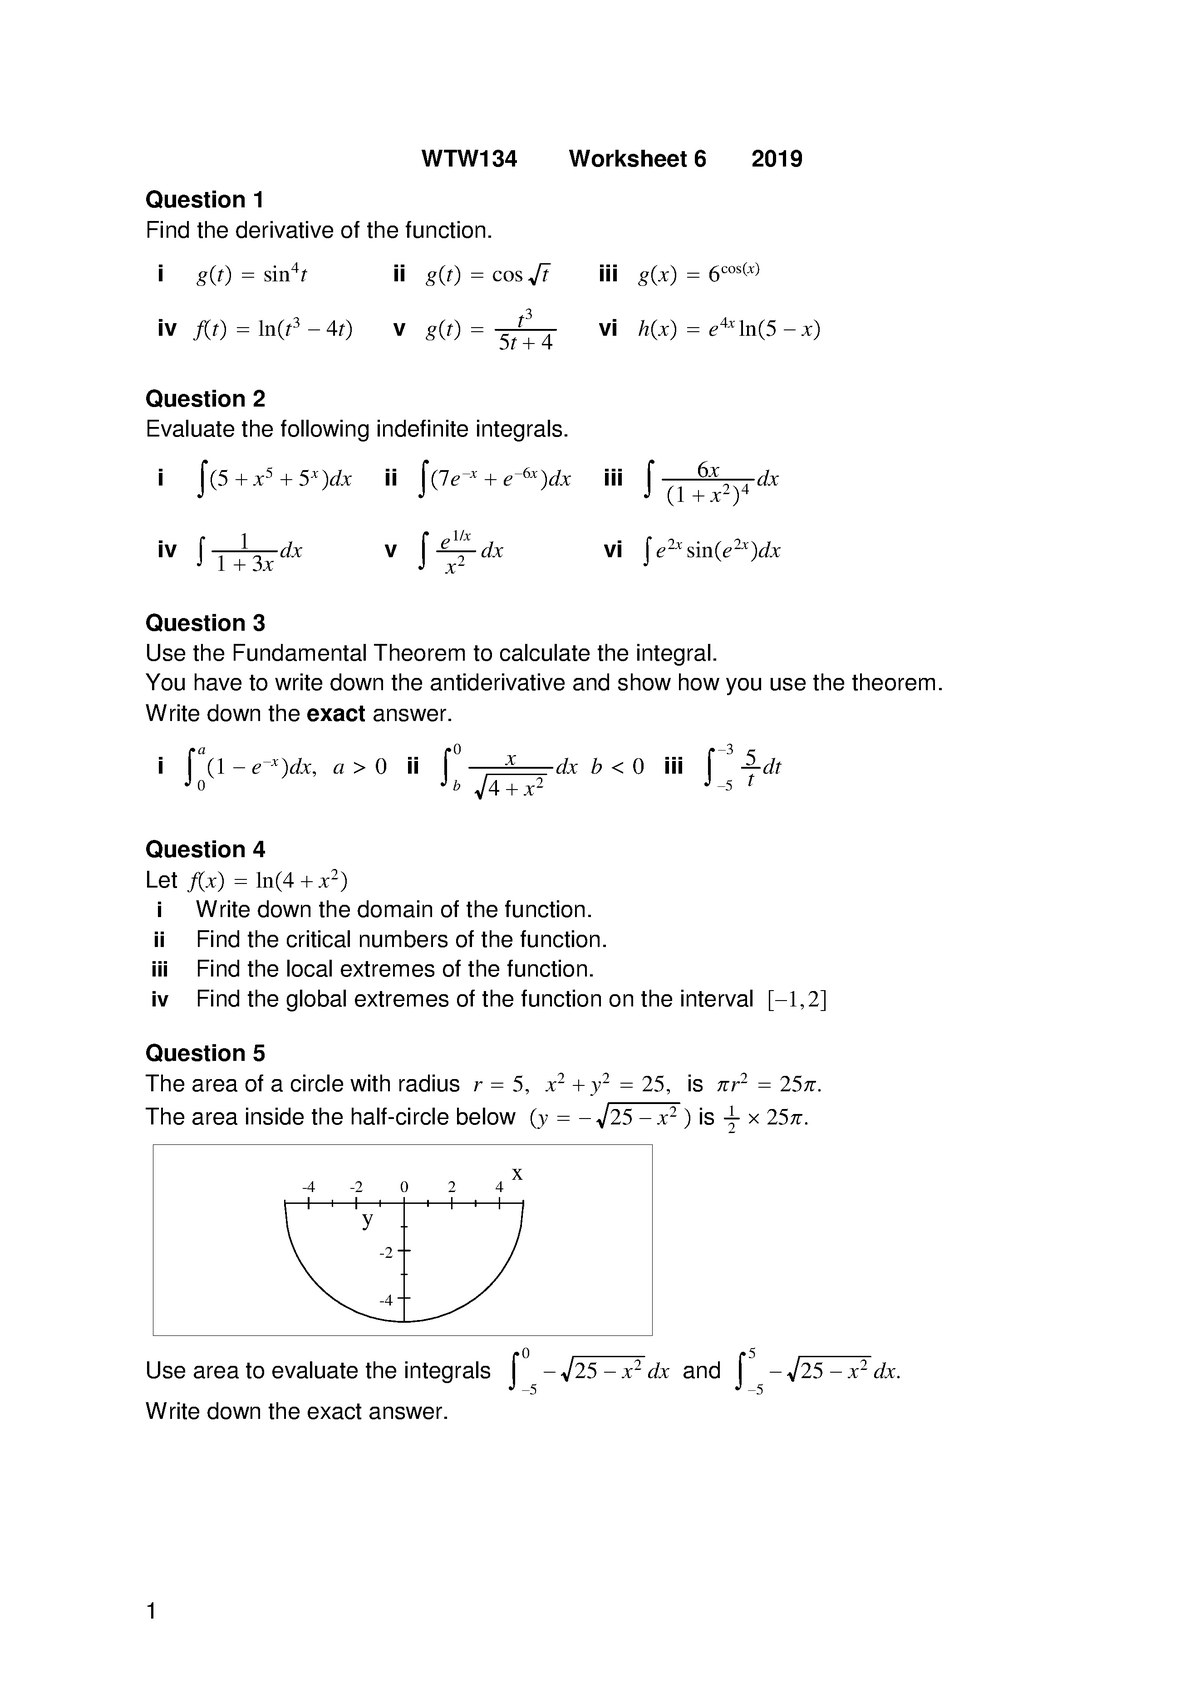 worksheet-6-wtw134-worksheet-6-2019-question-1-find-the-derivative-of-the-function-i-g-t-sin